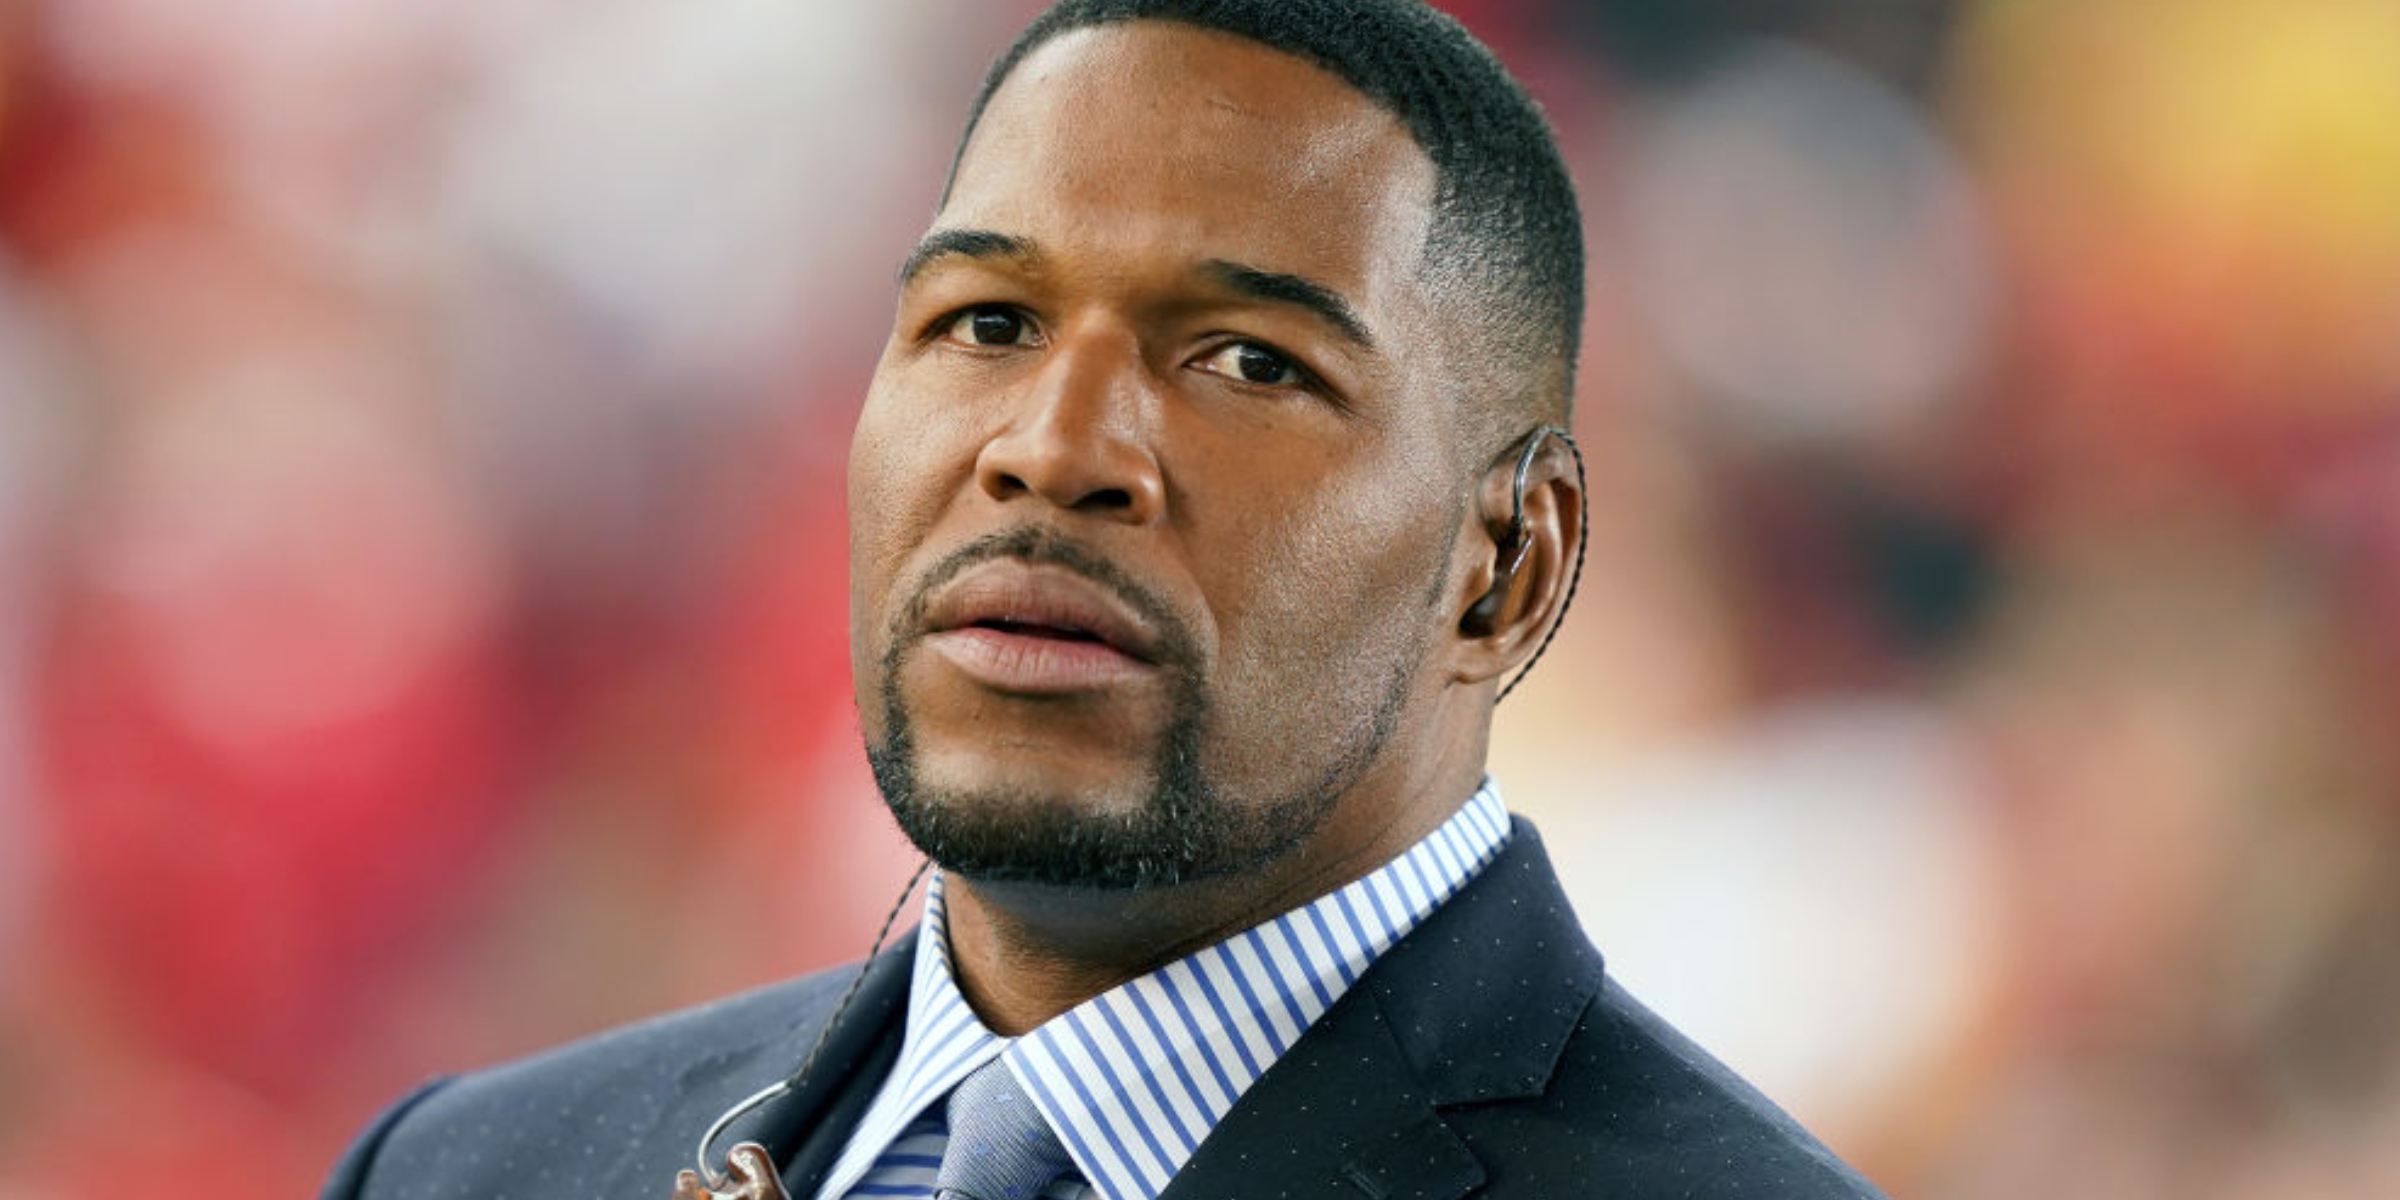 Michael Strahan | Source: Getty Images